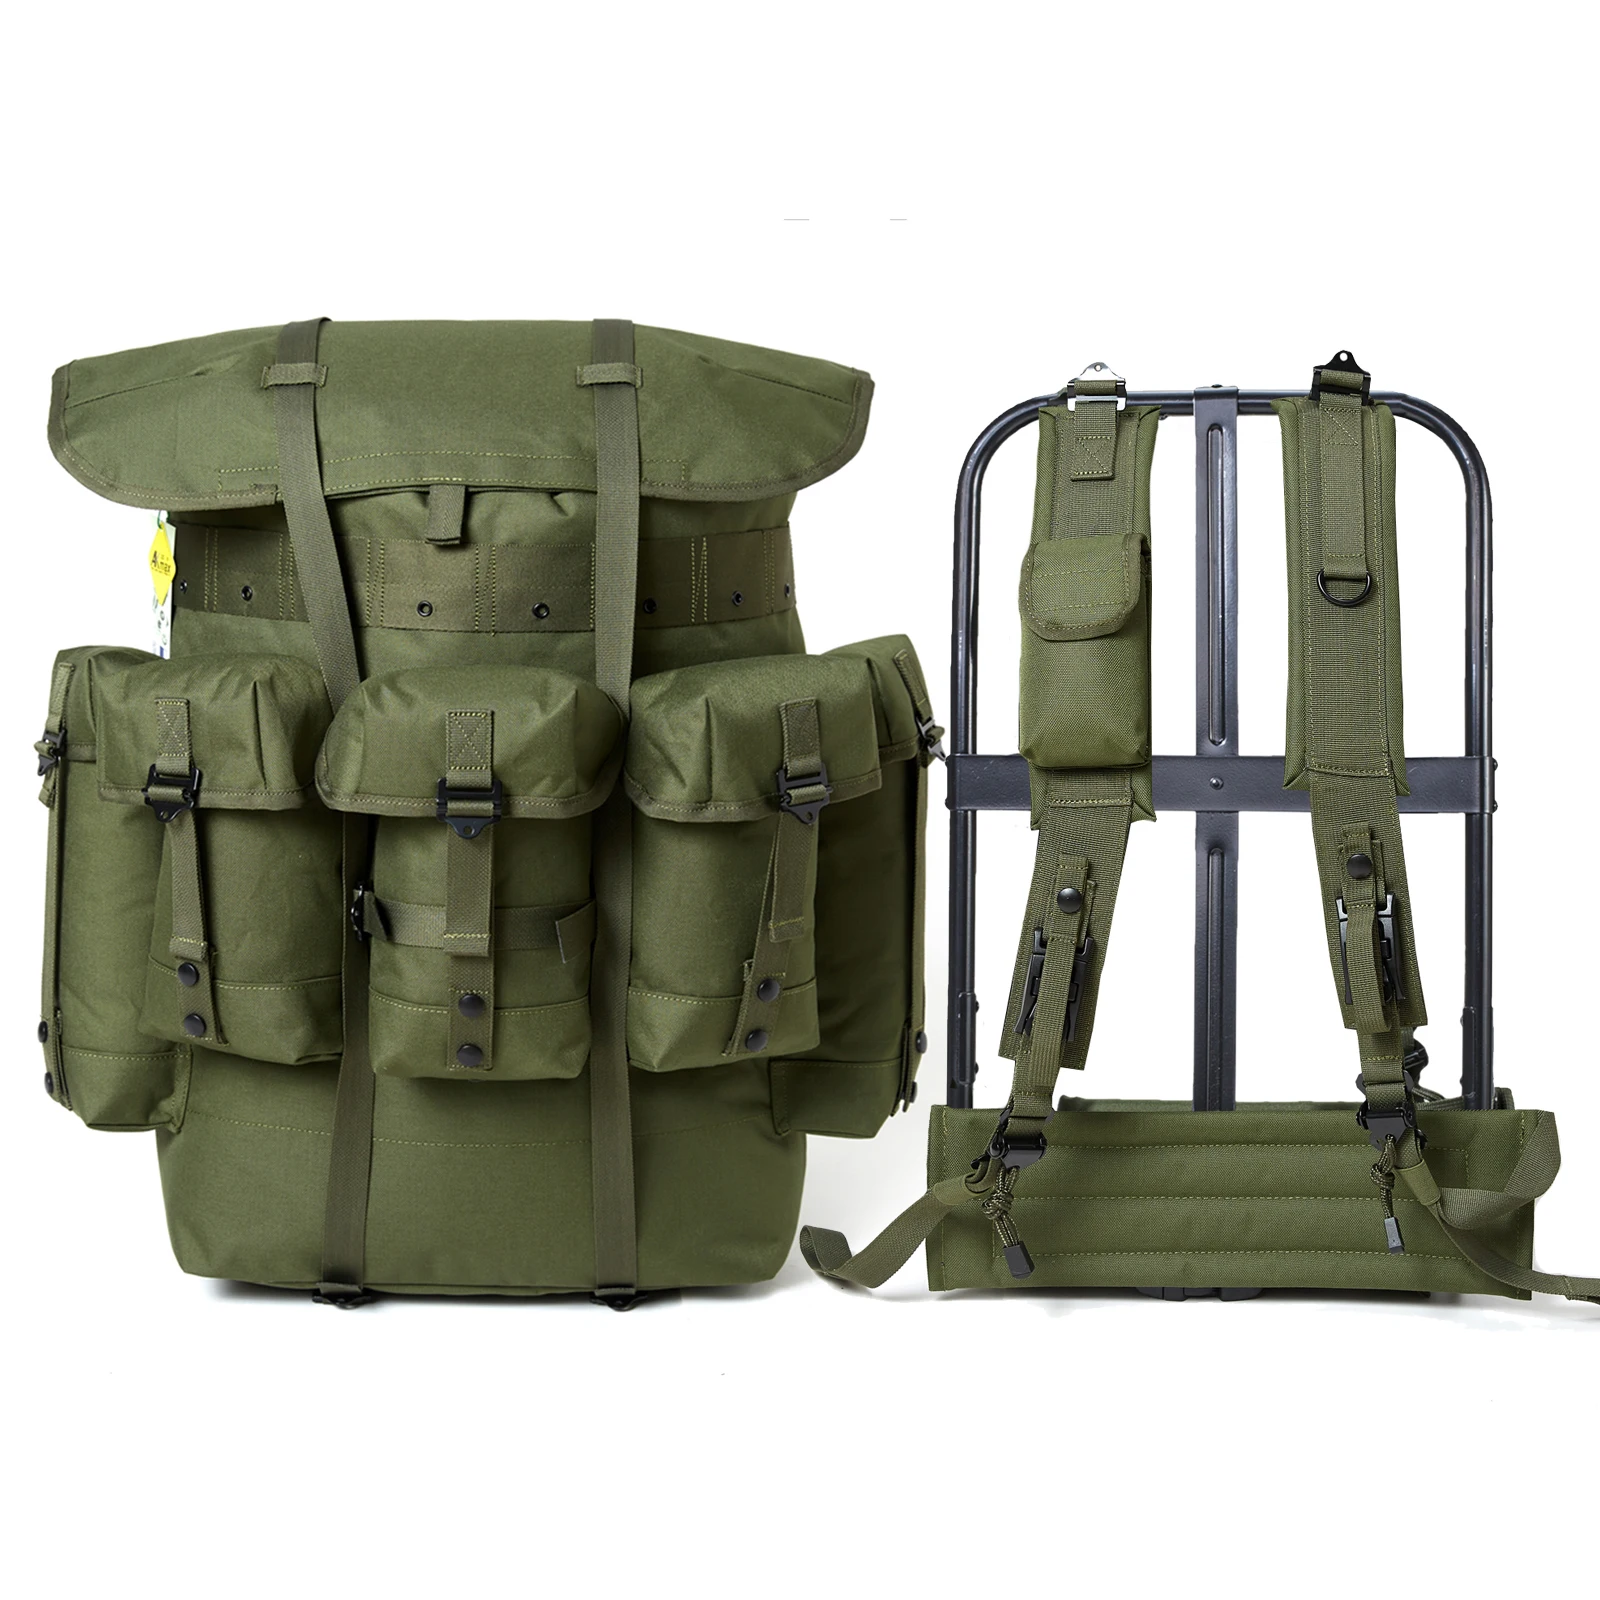 Details about   VINTAGE GENUINE U.S MILITARY ALICE FIELD PACK OD GREEN 1981 BACKPACK LARGE 